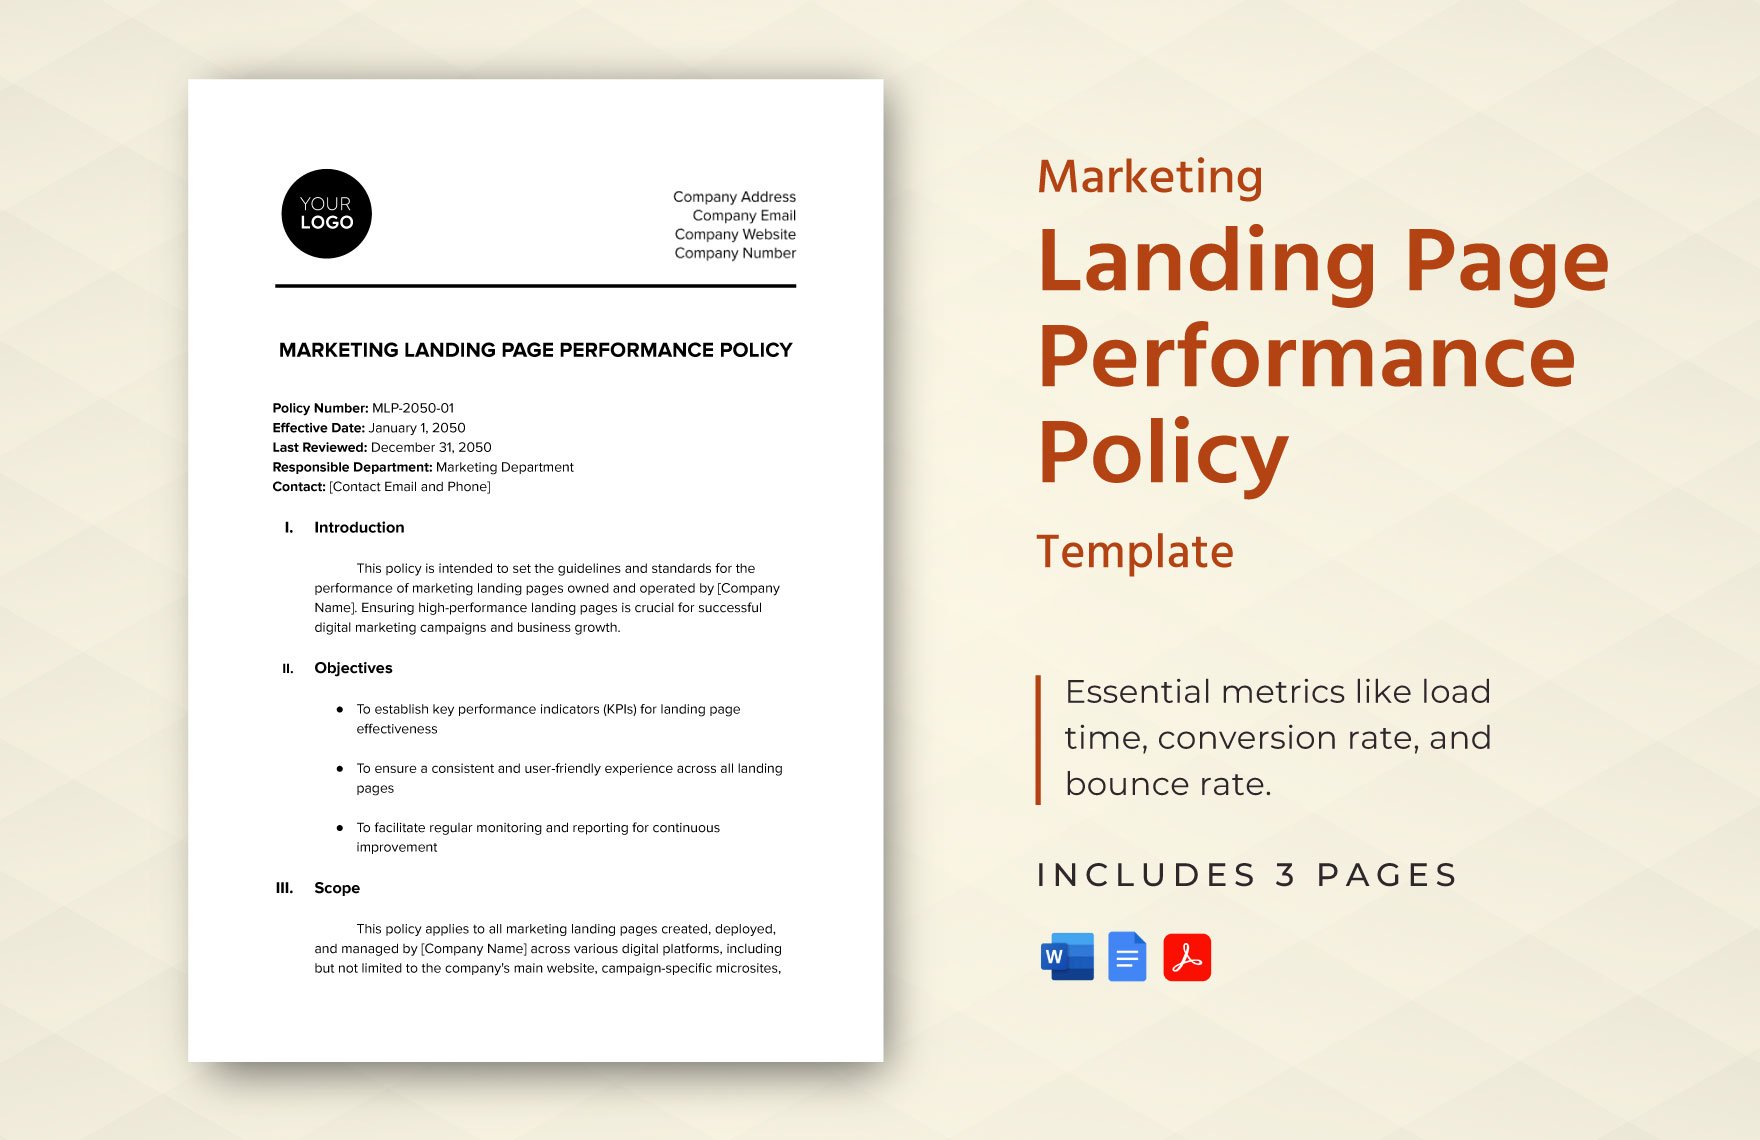 Marketing Landing Page Performance Policy Template in Word, Google Docs, PDF